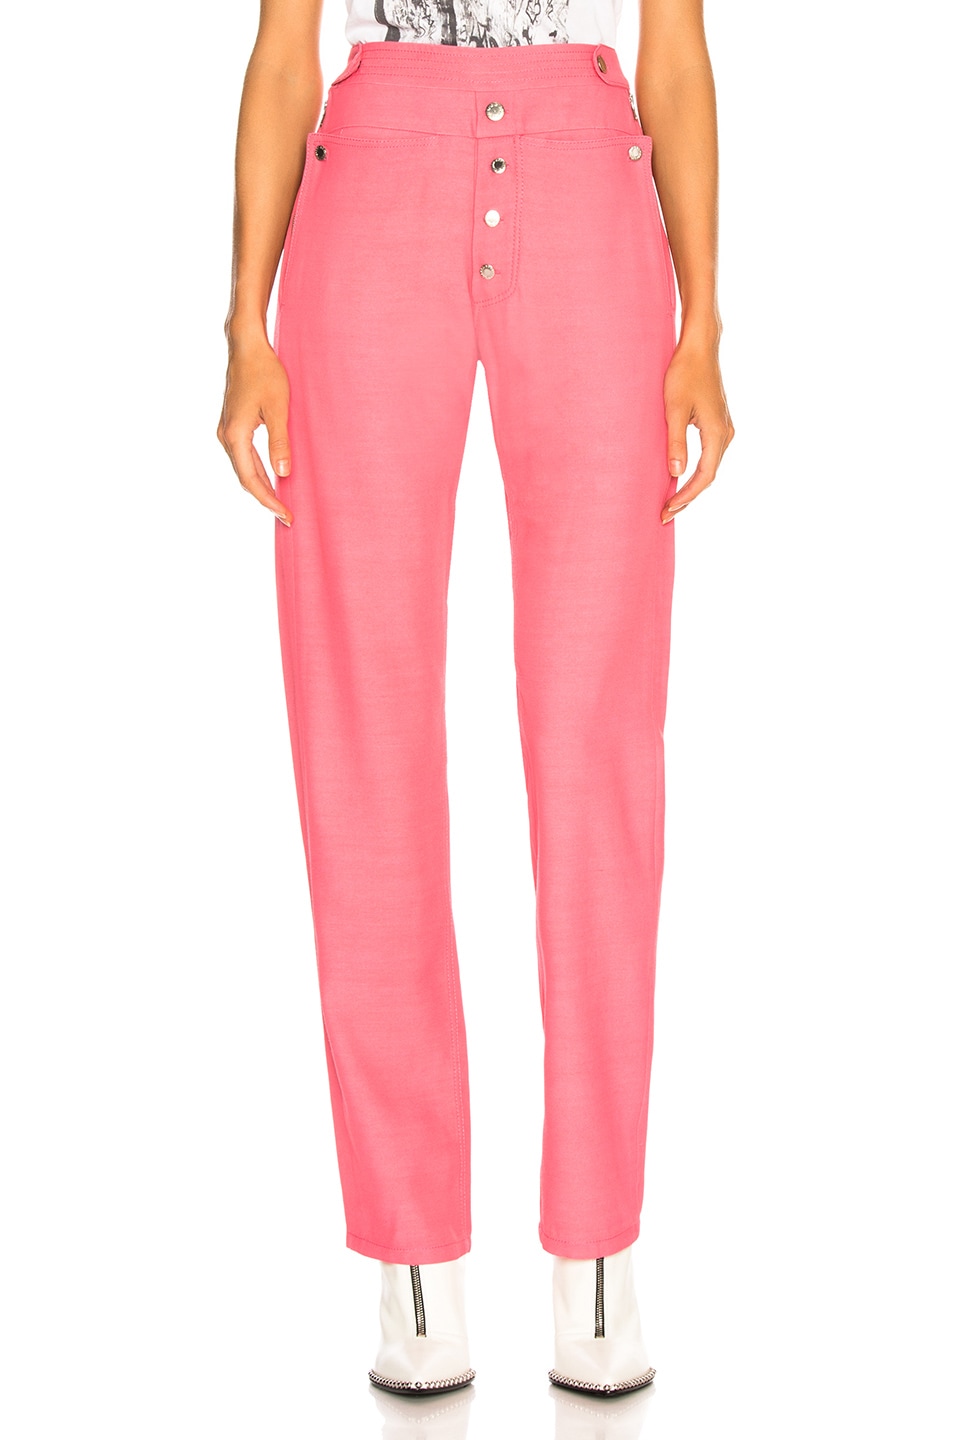 Image 1 of TRE by Natalie Ratabesi Wide Leg Charlotte Pant in Pink Candy